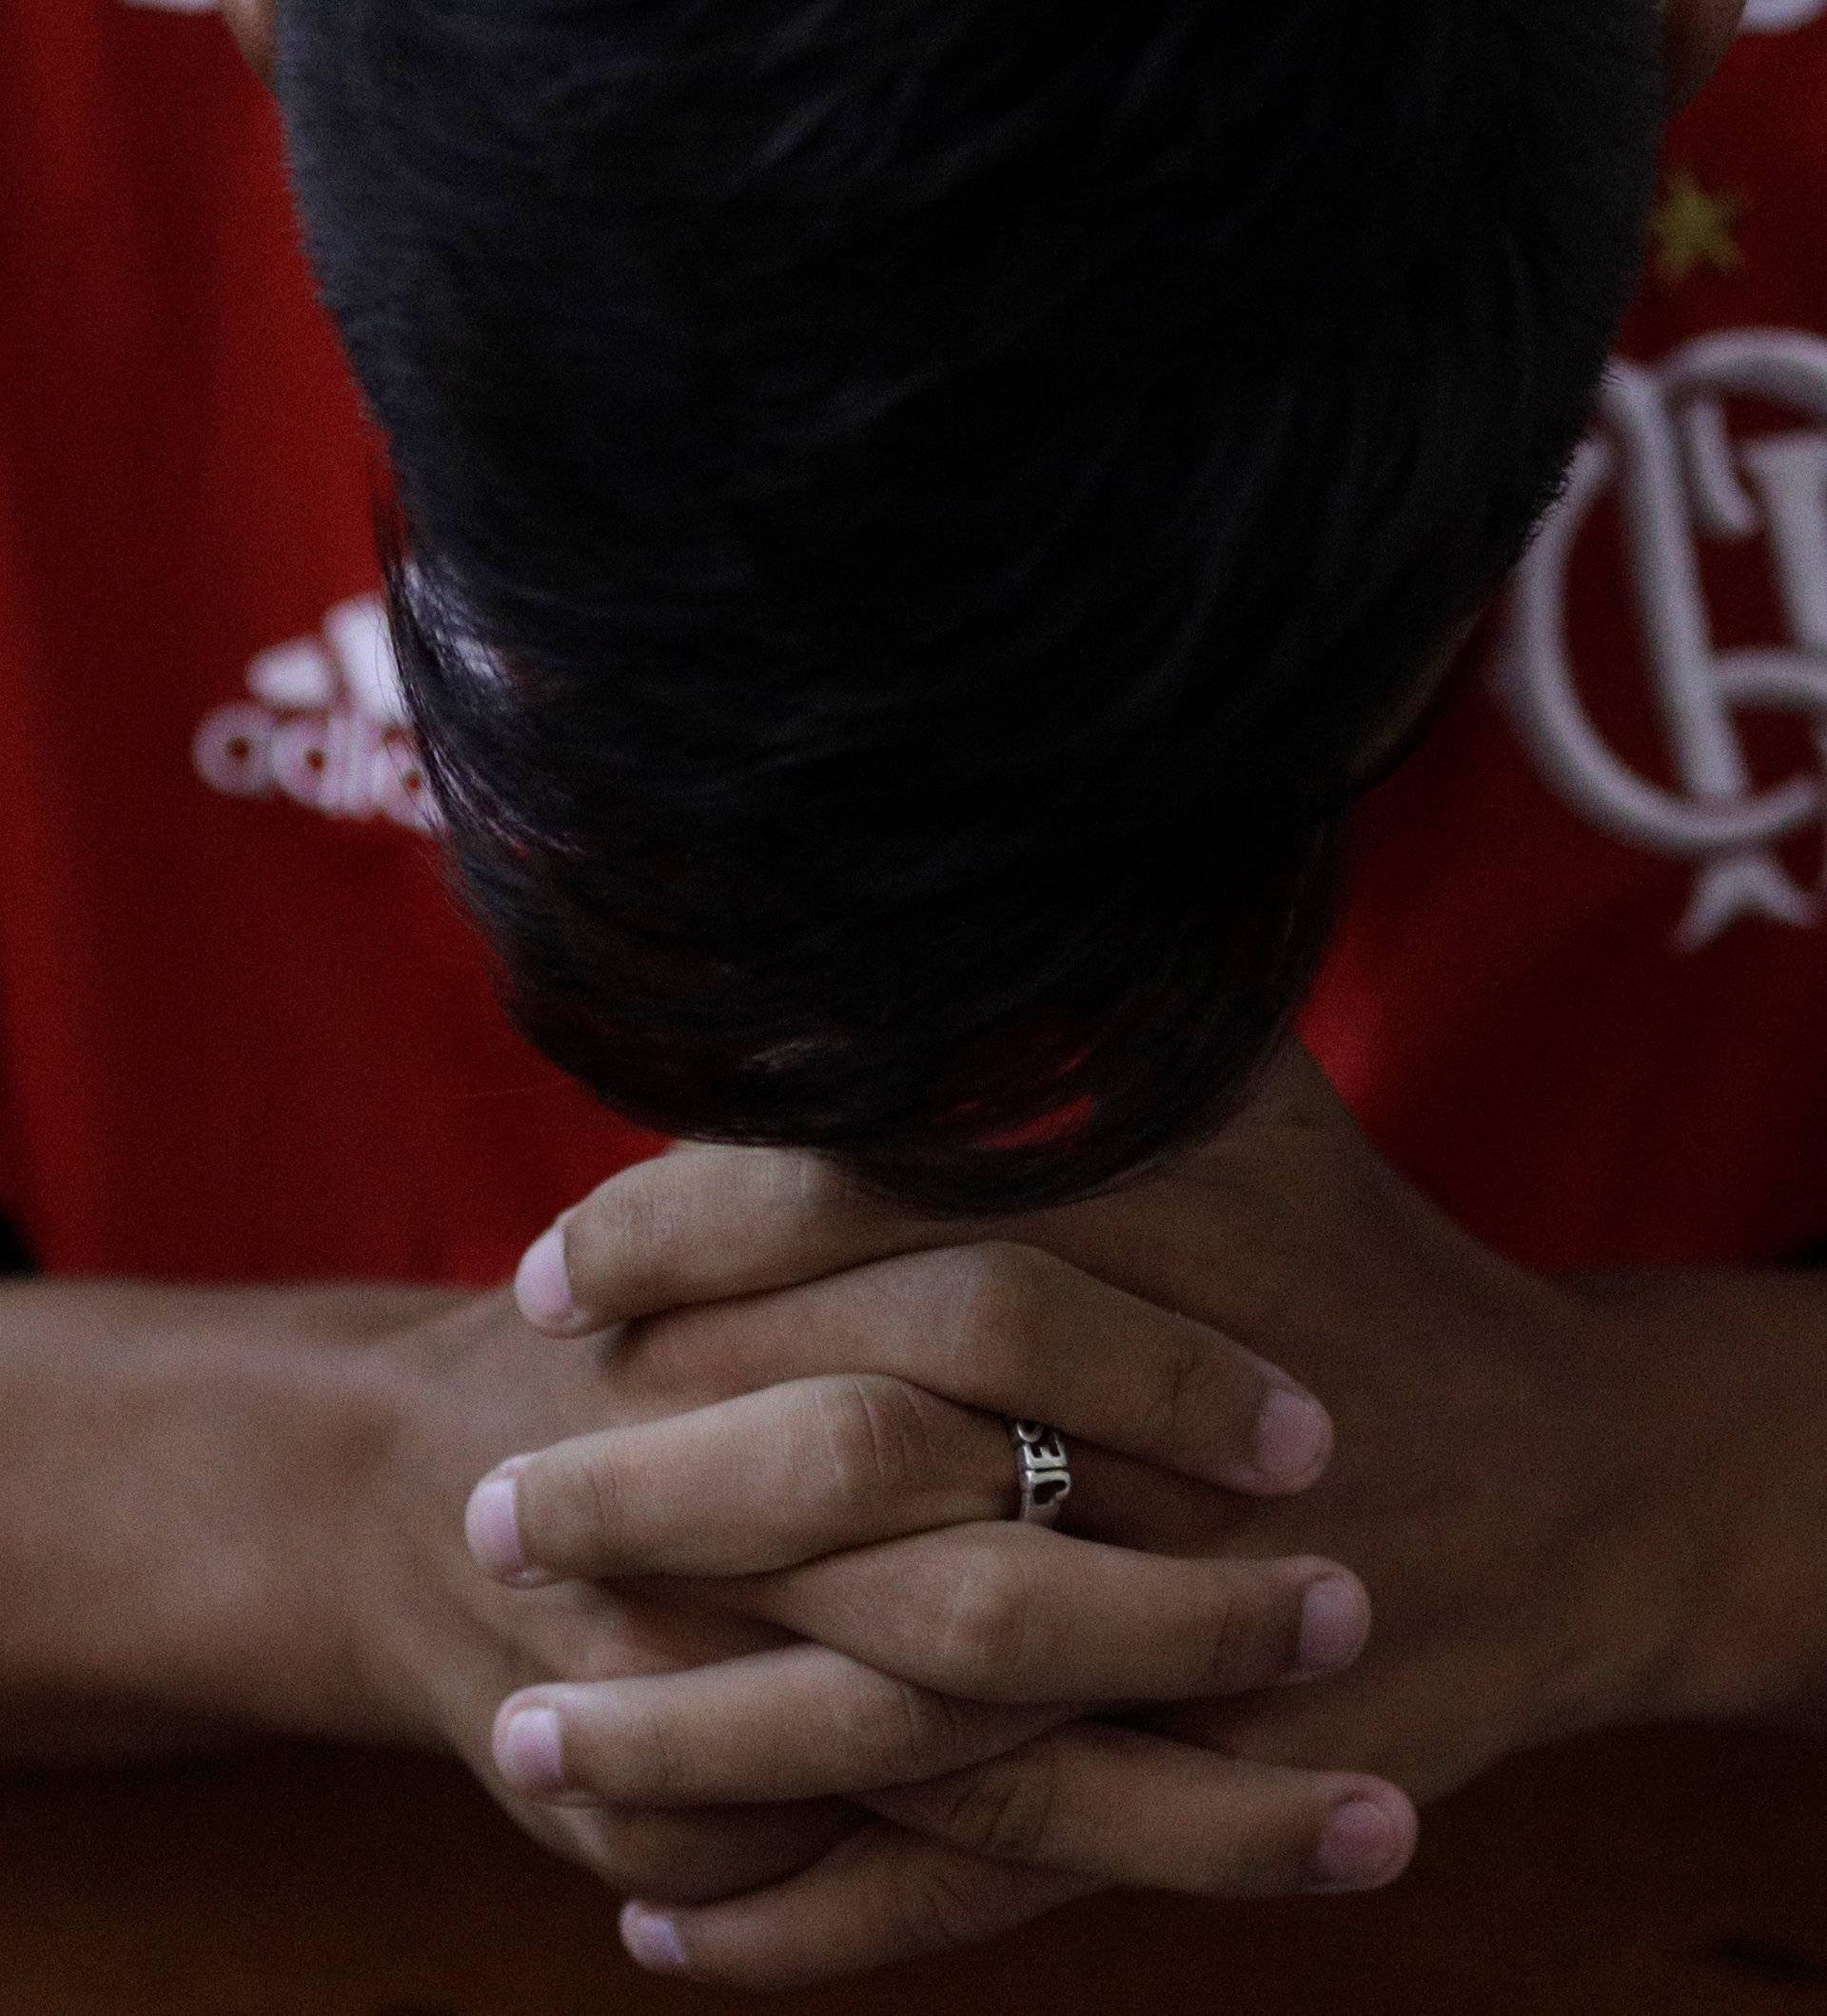 Flamengo's youth soccer player reacts during a mass in memory of the victims of the club's training center deadly fire in Rio de Janeiro